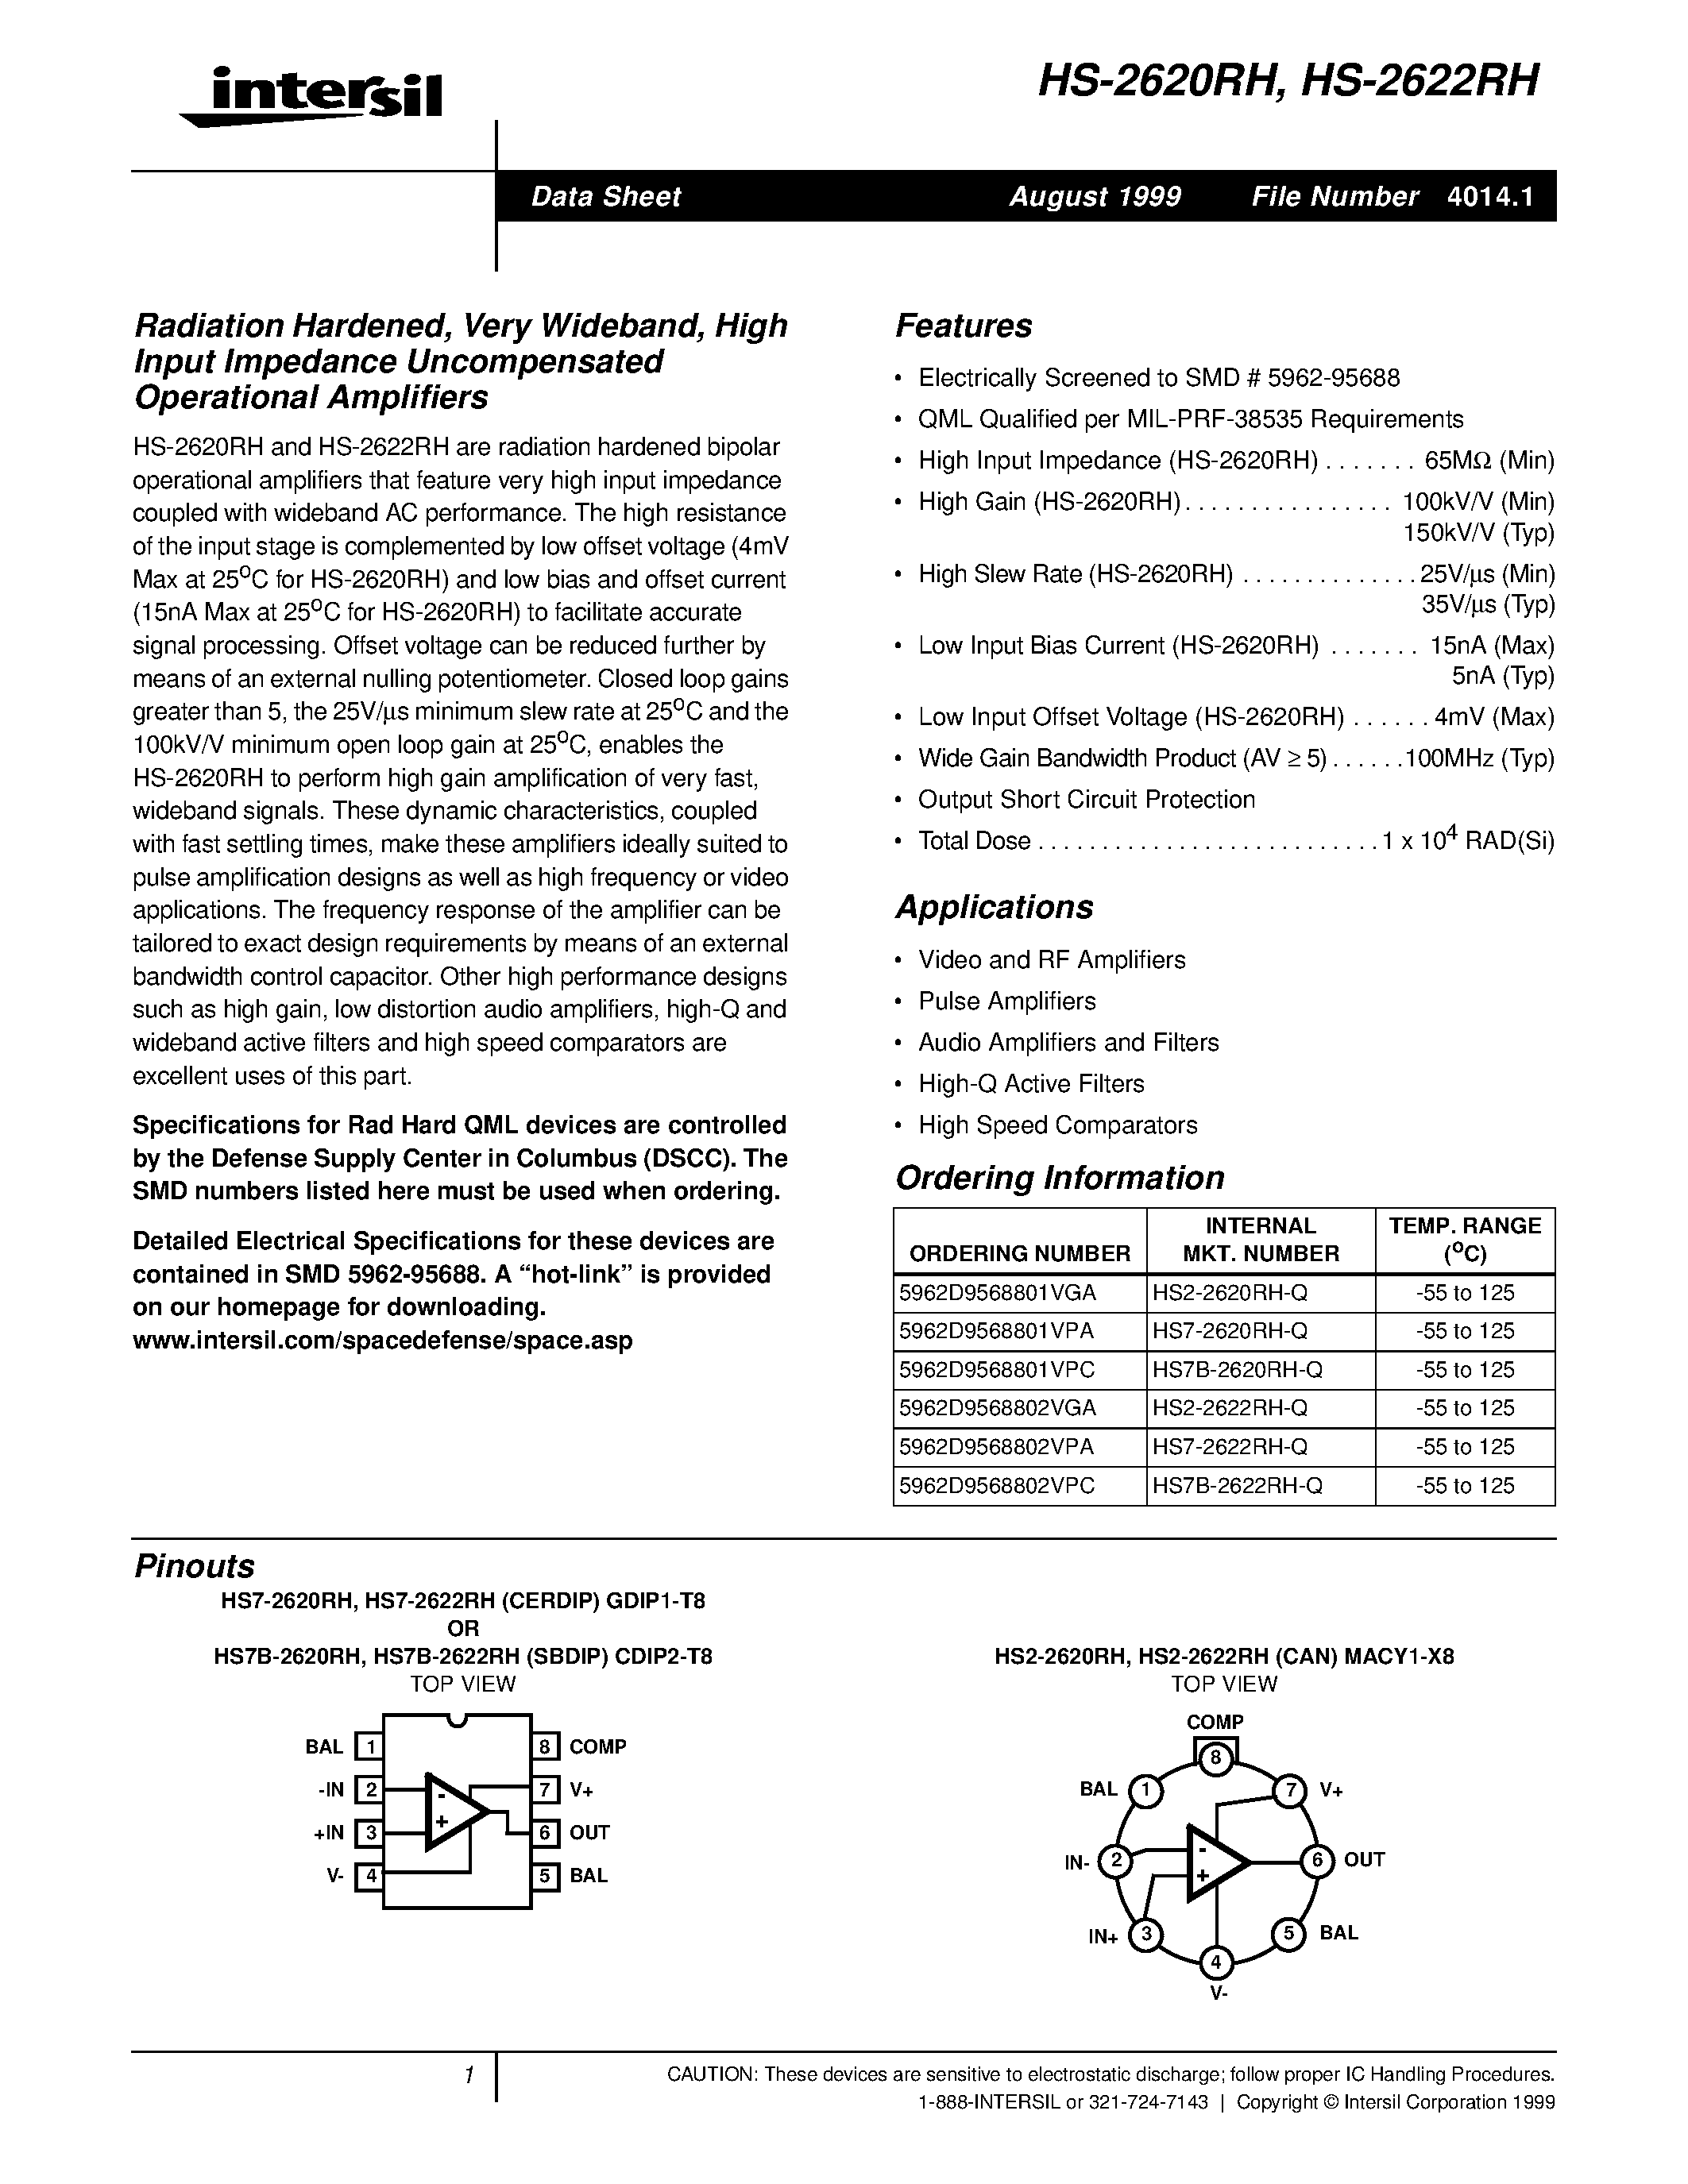 Datasheet HS2-2620RH-Q - Radiation Hardened/ Very Wideband/ High Input Impedance Uncompensated Operational Amplifiers page 1